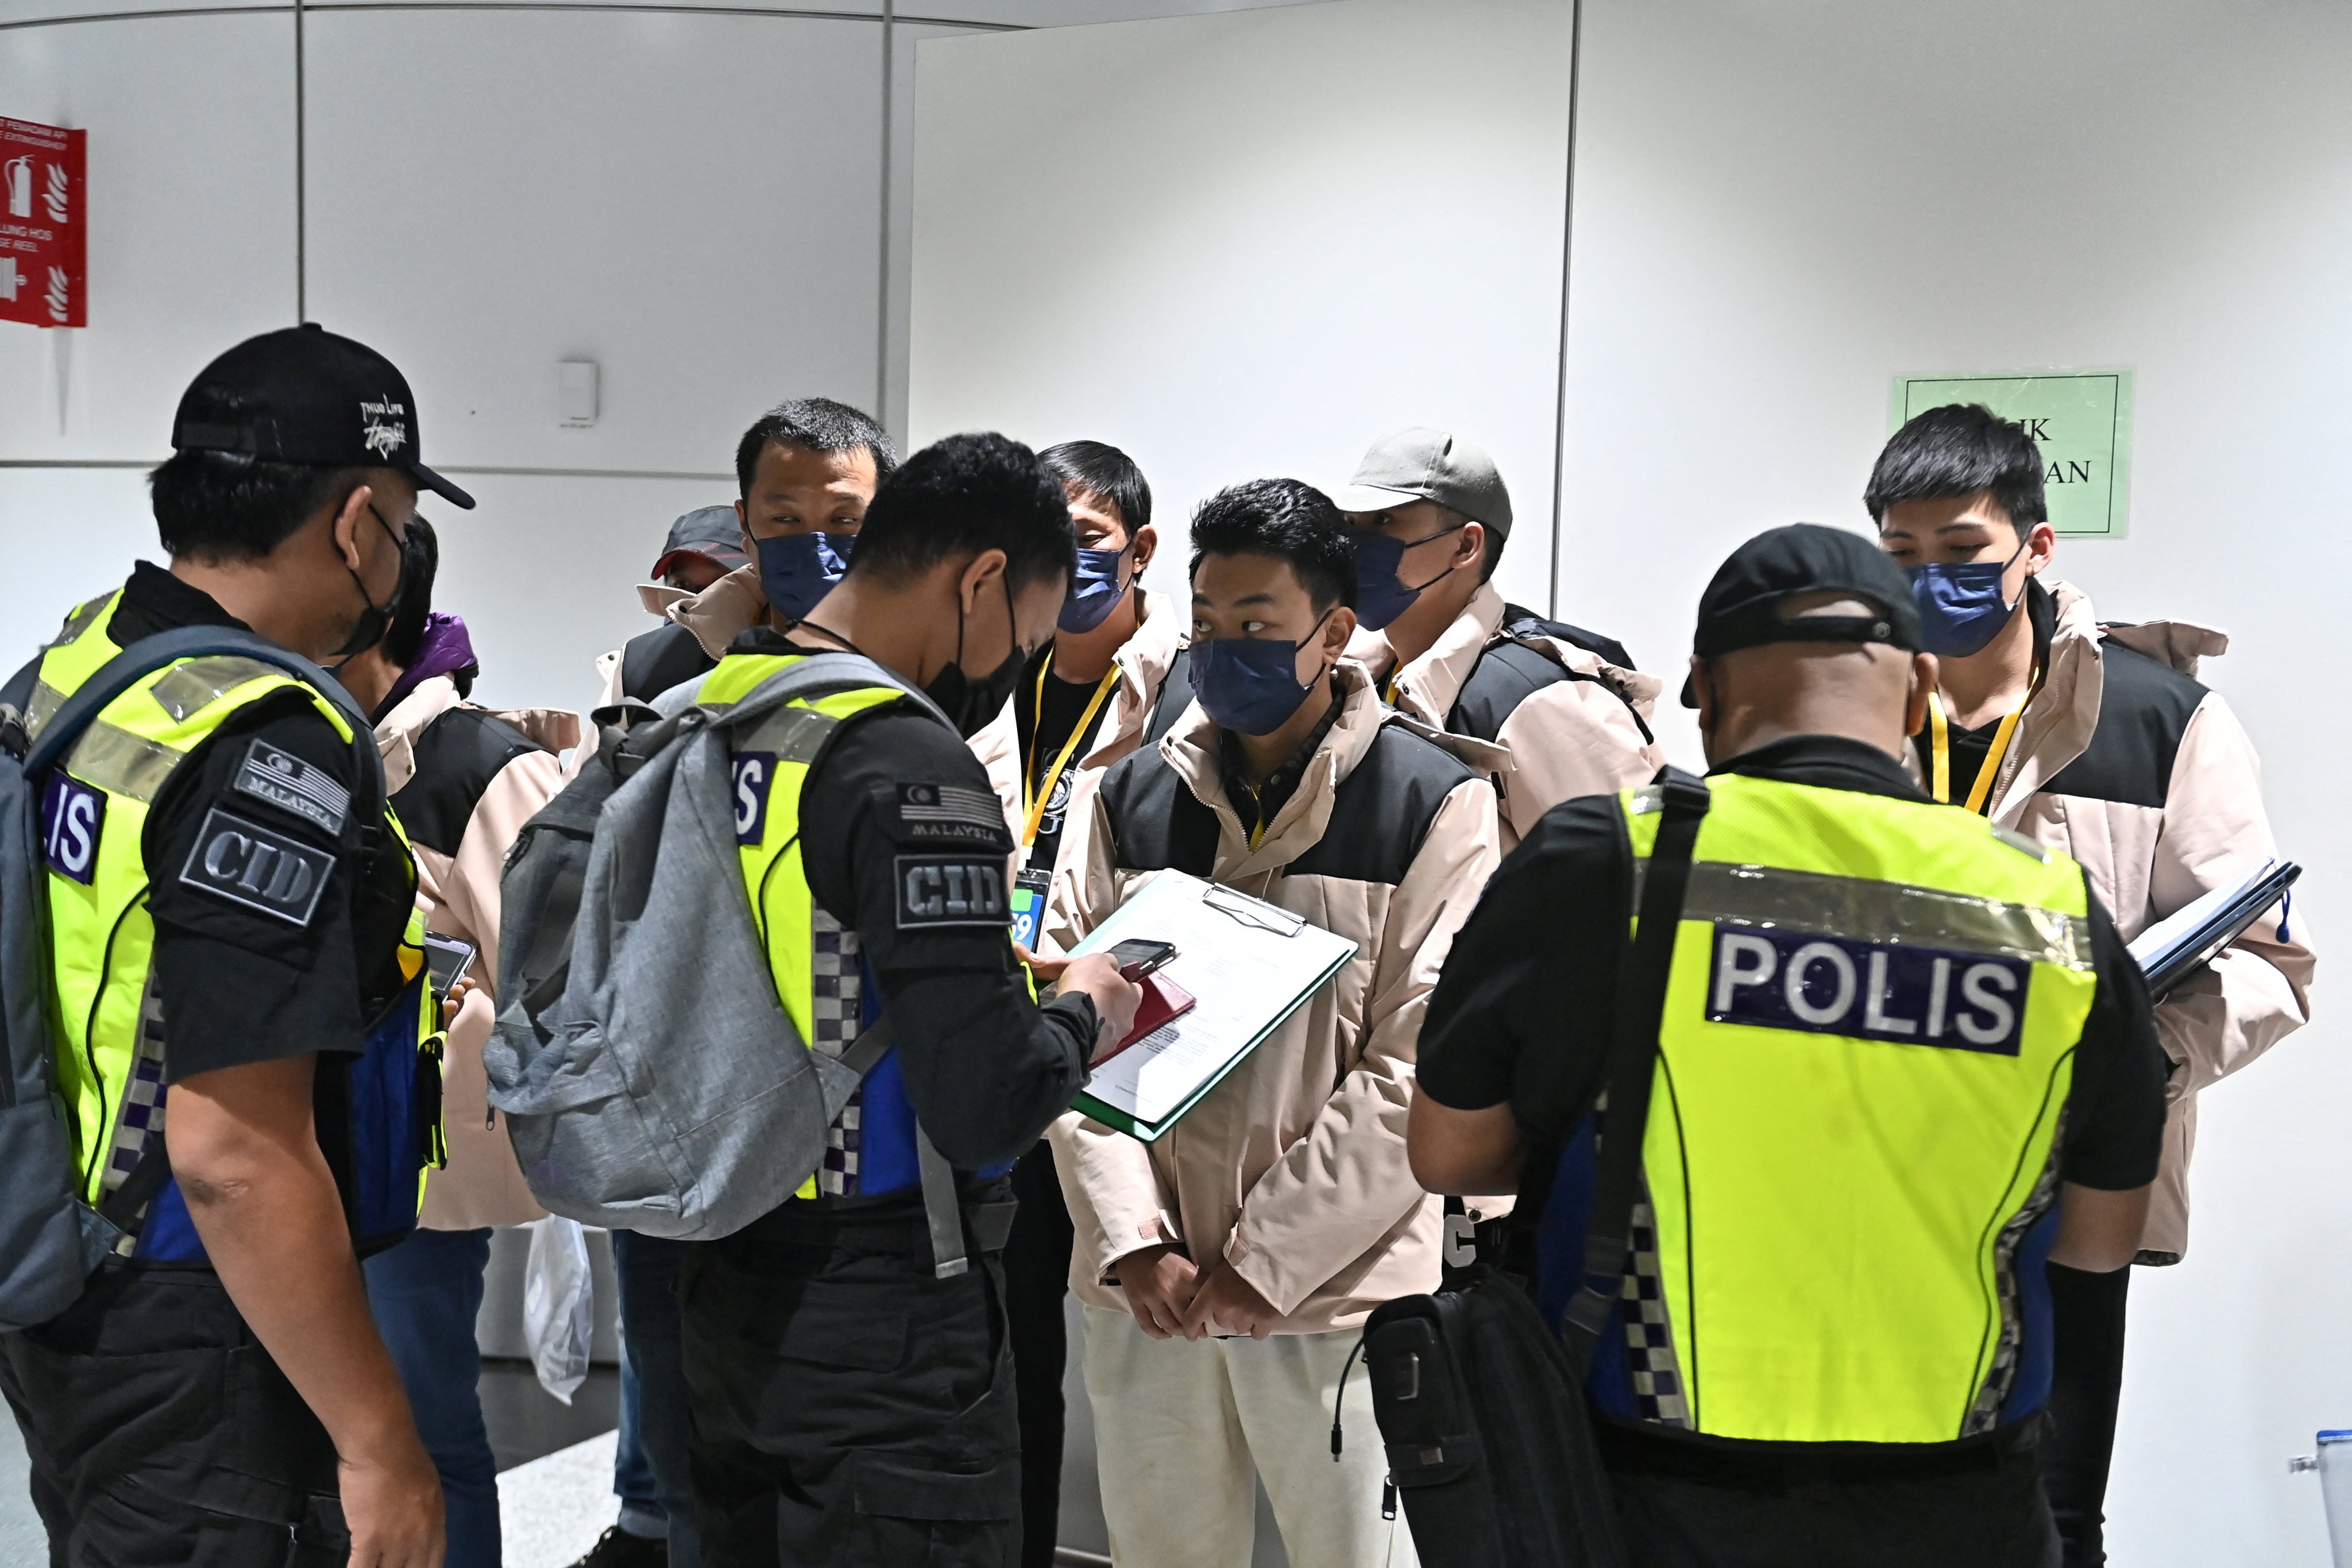 Police officers speak to some of 121 people suspected of being victims of job scams in Myanmar who arrived in Malaysia on Friday. Photo: Malaysia’s Ministry of Foreign Affairs/ Handout via Reuters